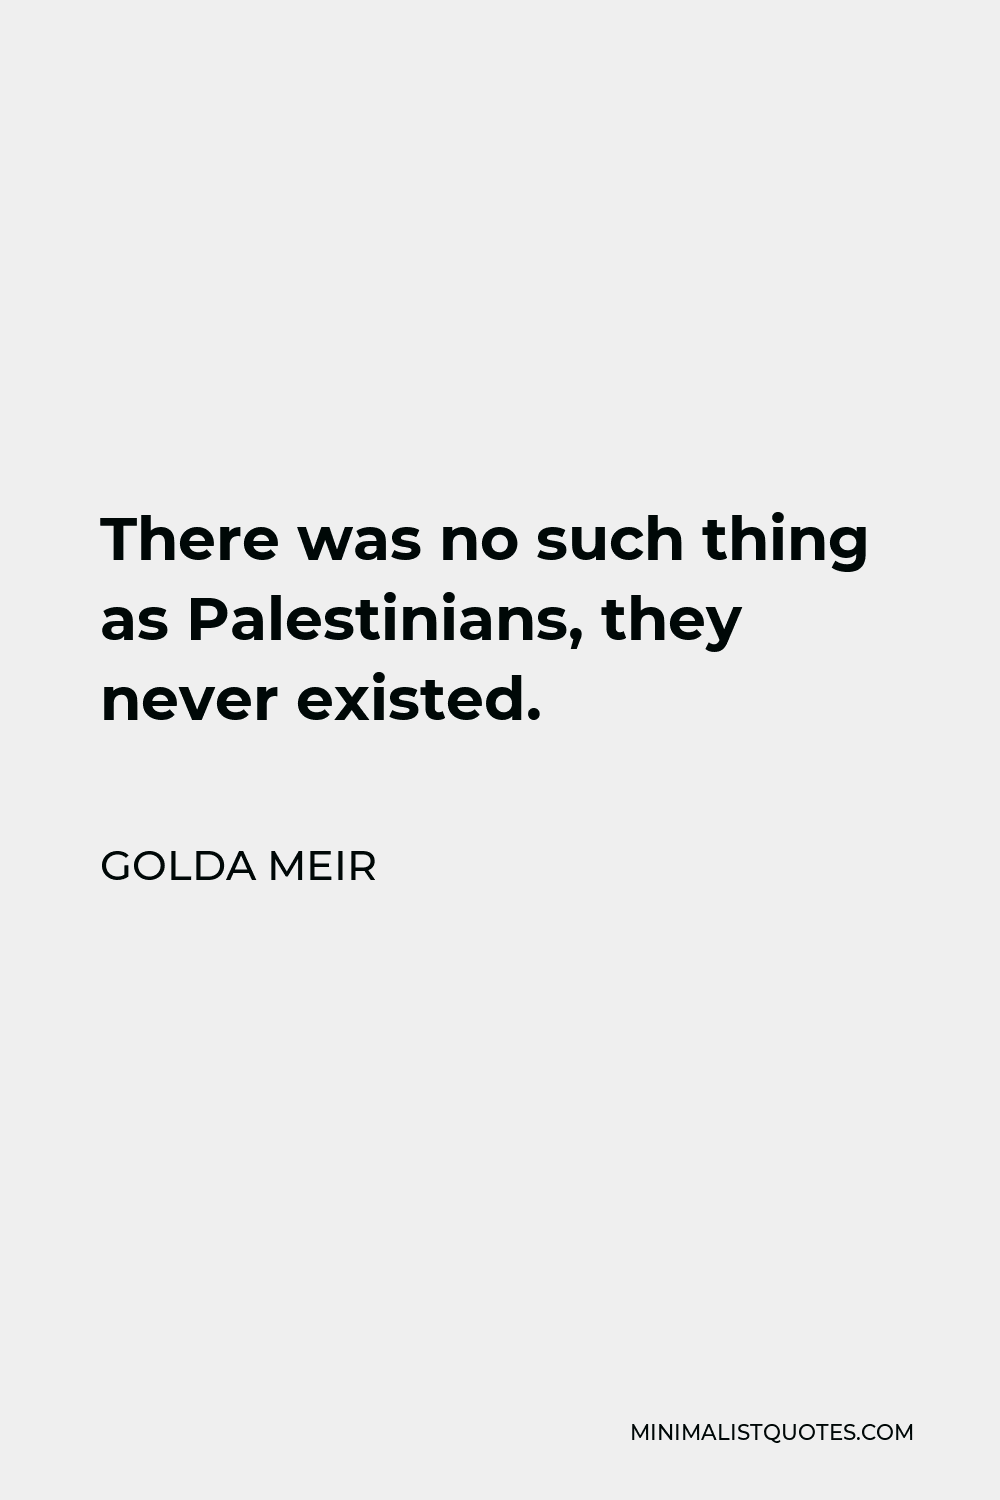 Golda Meir Quote - There was no such thing as Palestinians, they never existed.